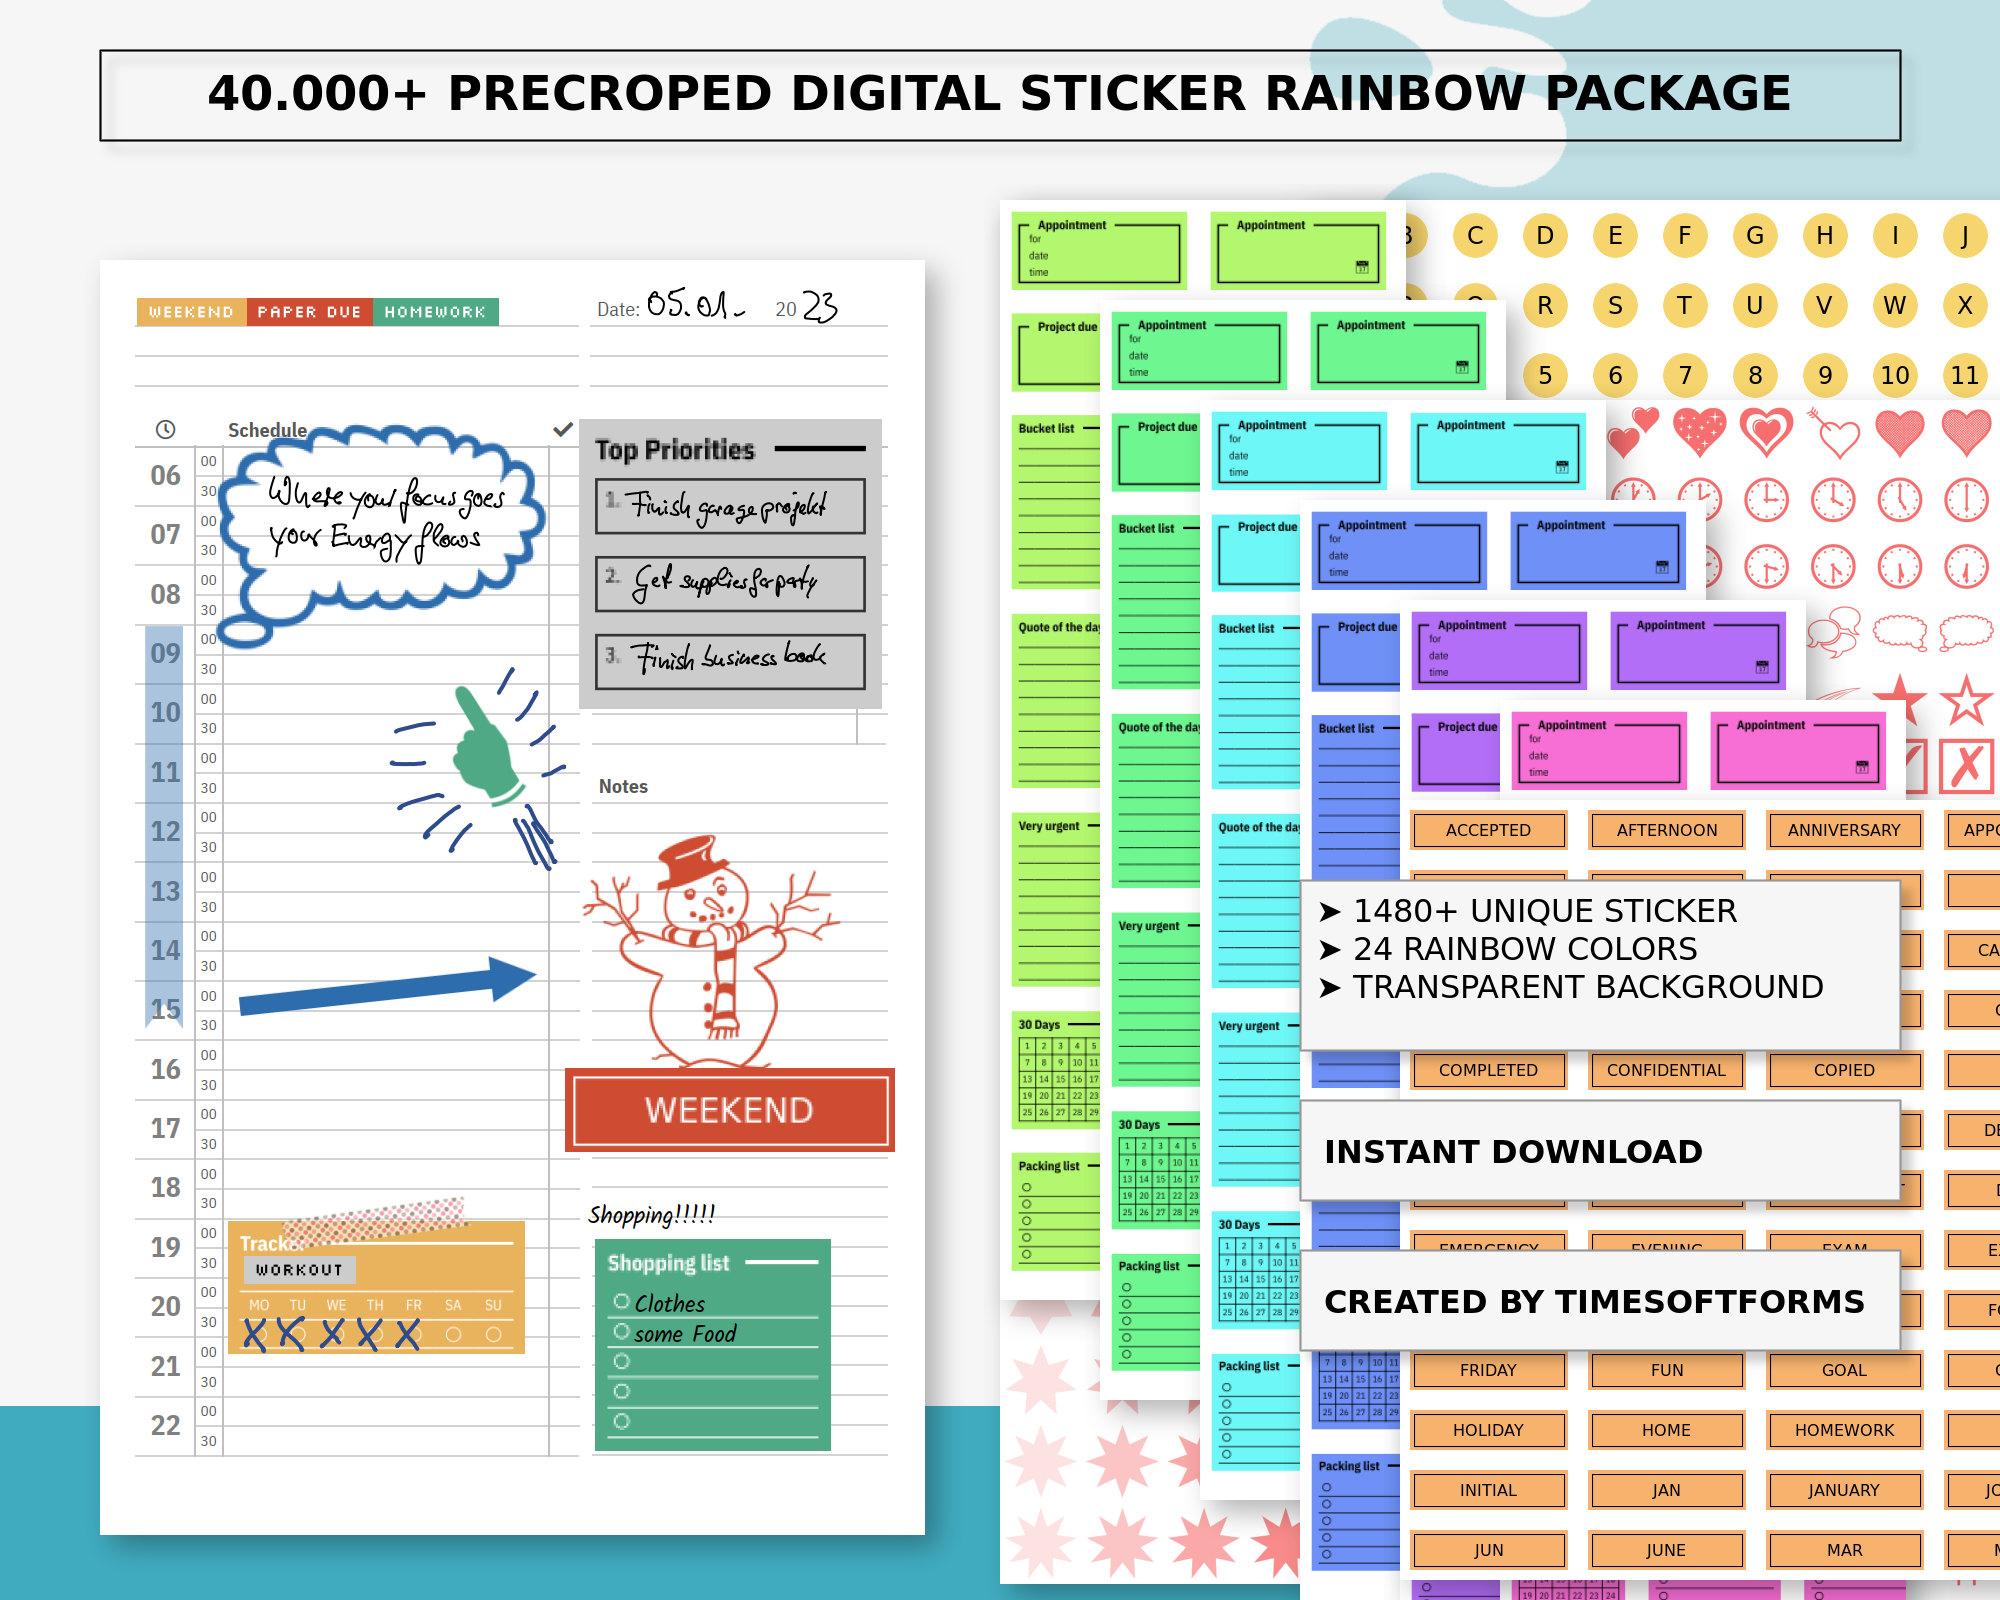 Protected: Sticker Rainbow Colors 72dpi